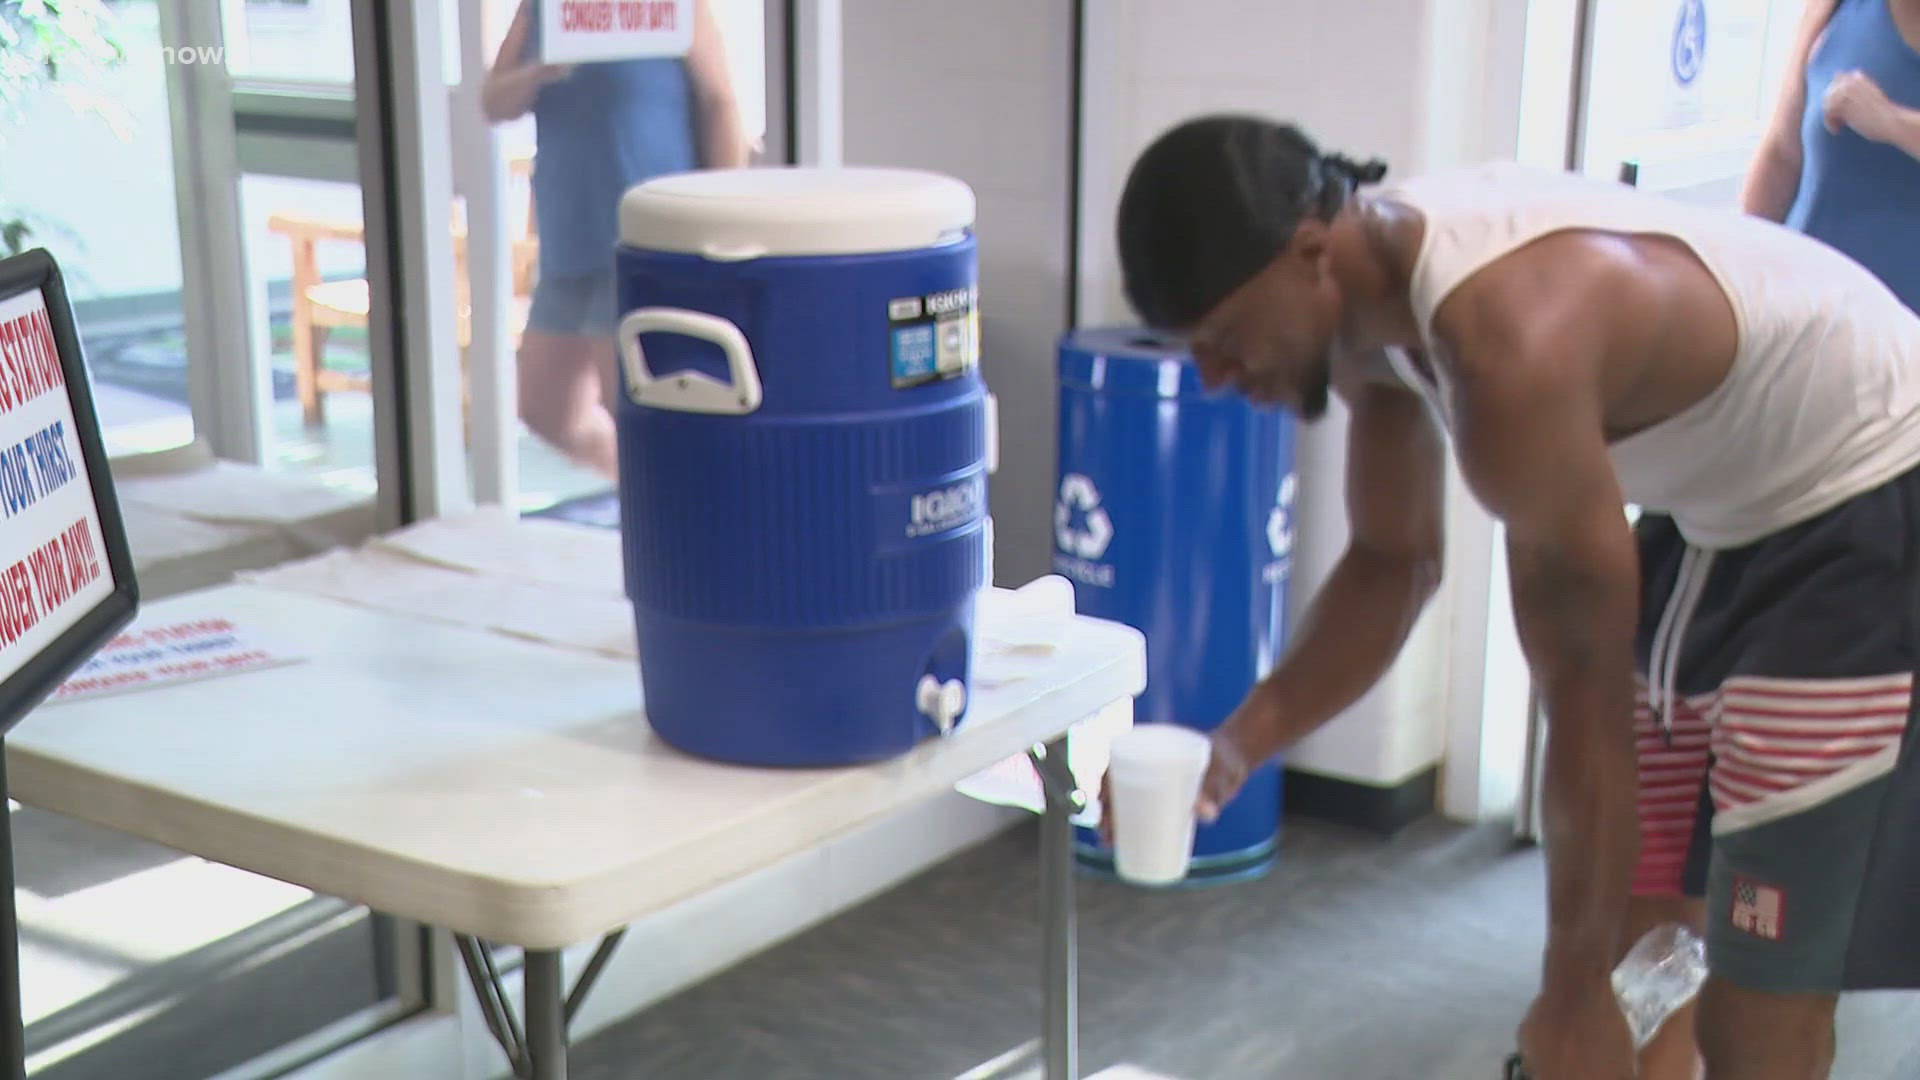 Another hot weekend pushed Newport News city leaders to open cooling centers around the city.